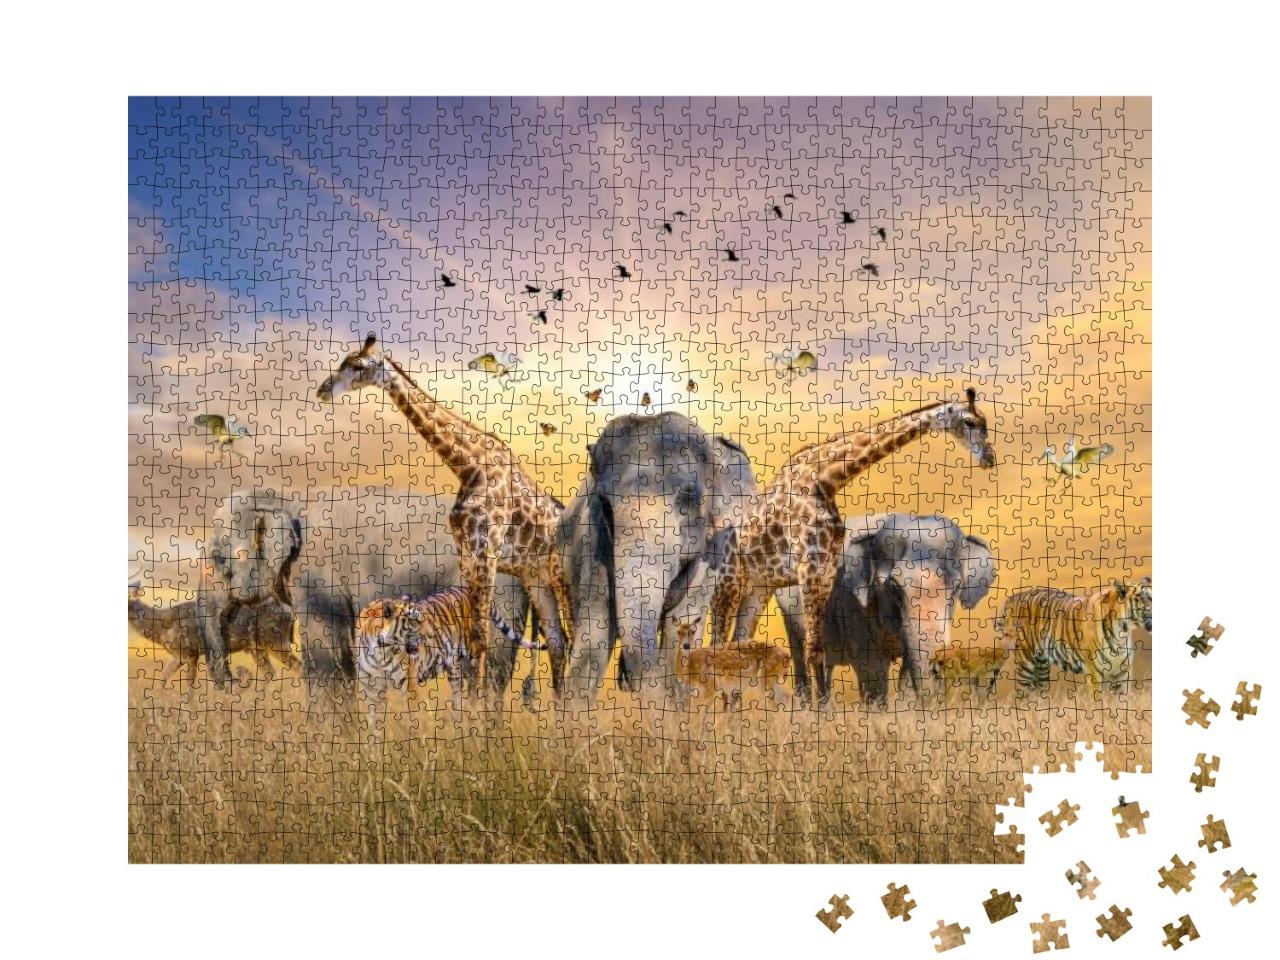 Large Group of African Safari Animals. Wildlife Conservat... Jigsaw Puzzle with 1000 pieces